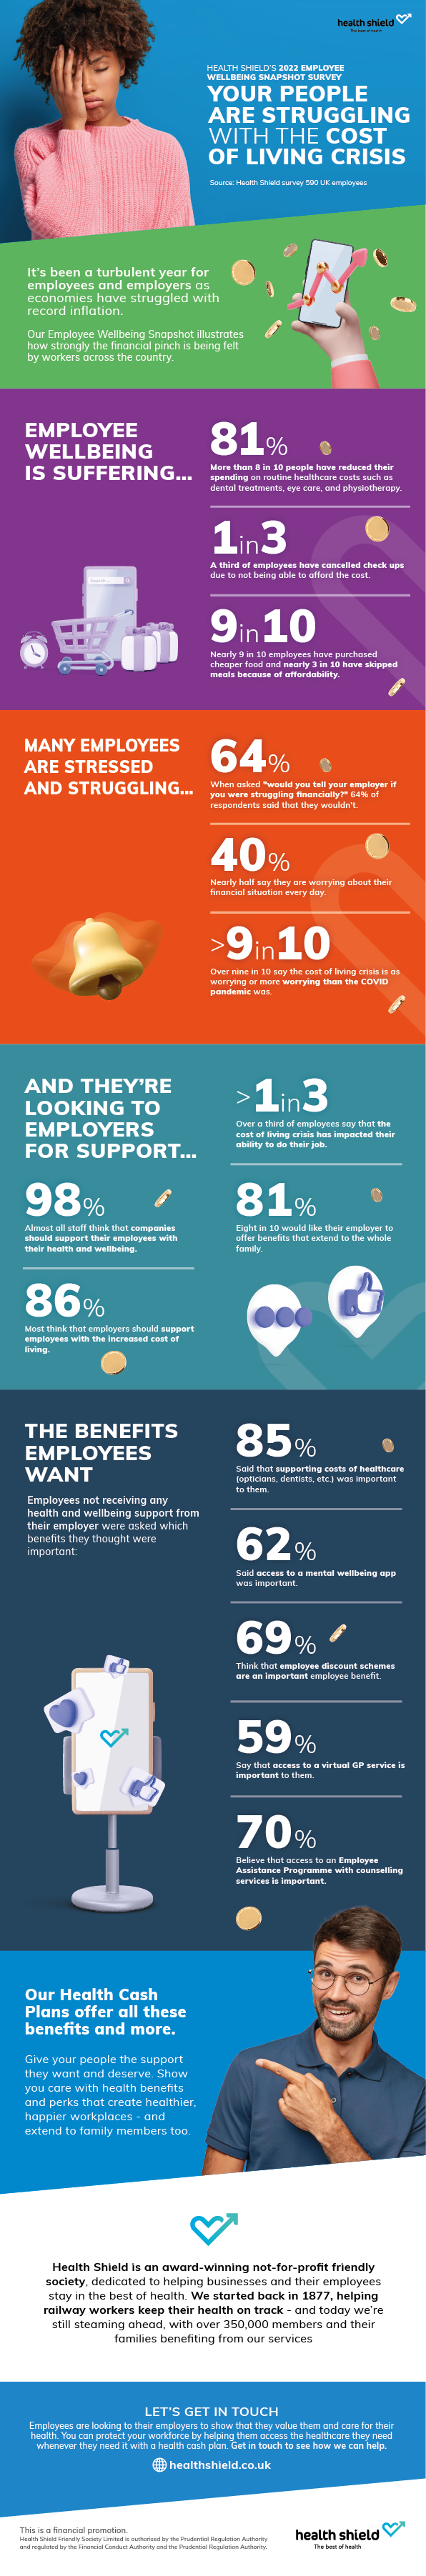 116.2 Employee Wellbeing Survey Results Infographic